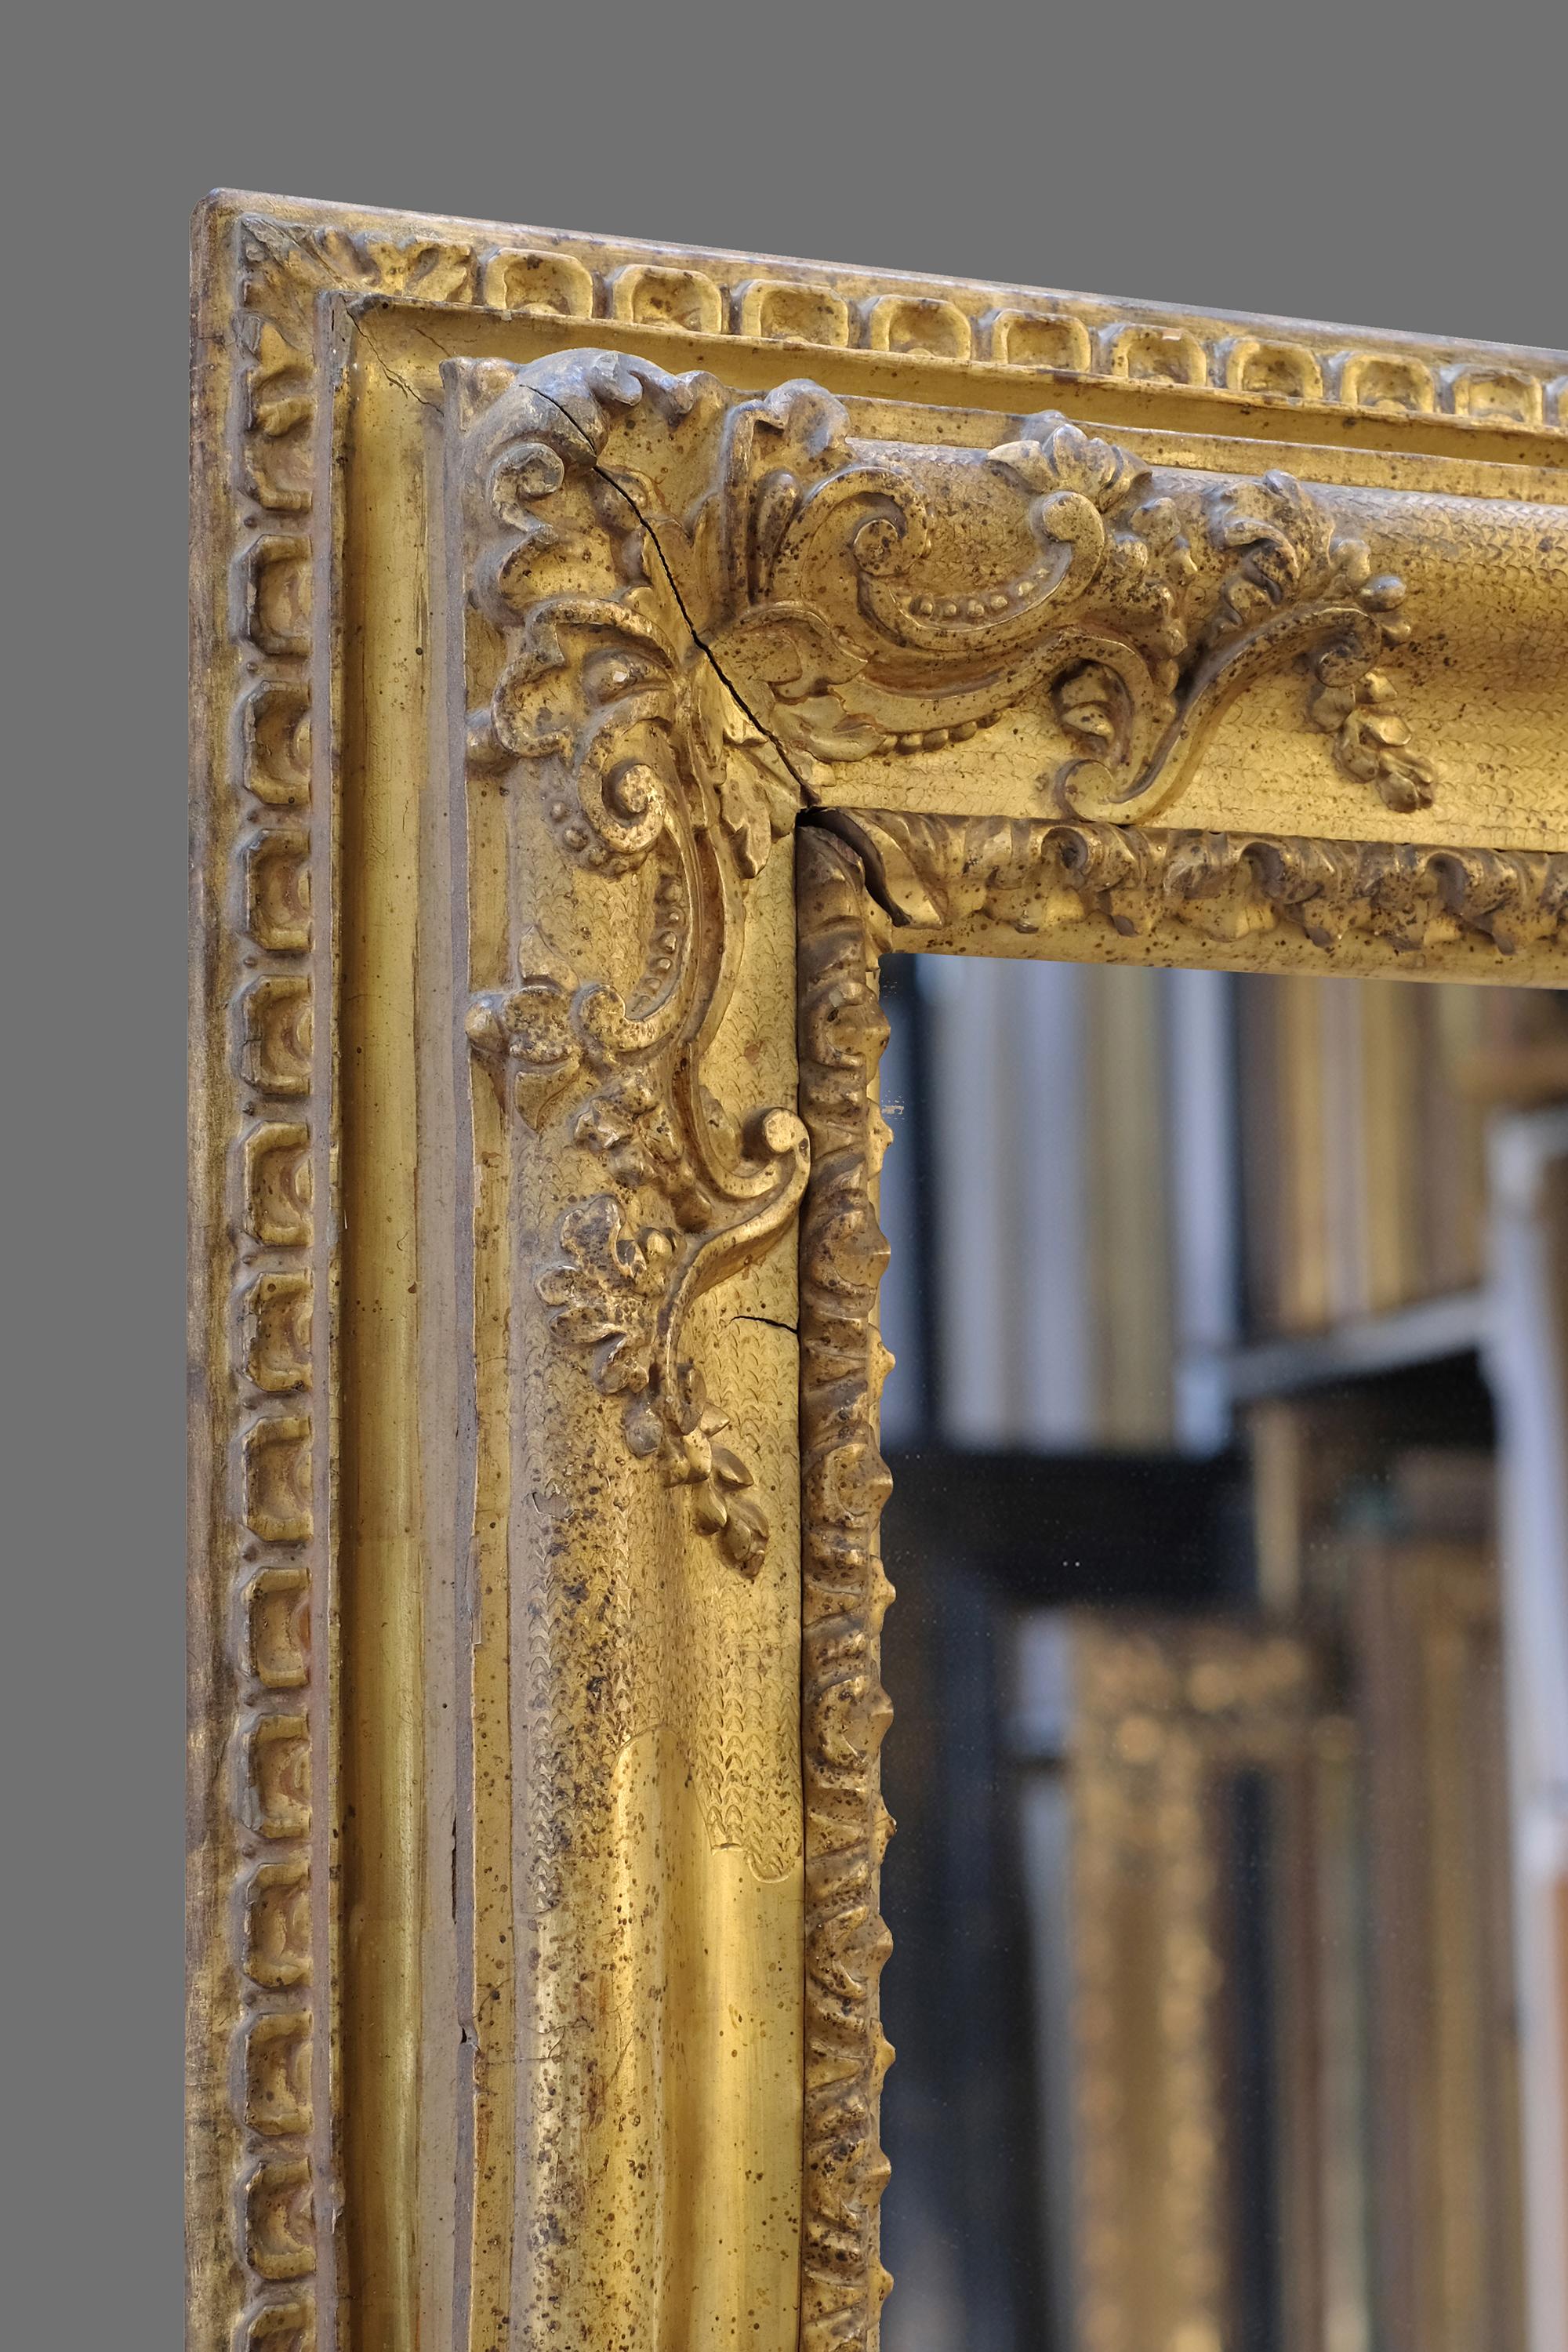 This is an exceptionally rare and exquisite hand carved mid 18th century Italian - Piedmontese late Baroque frame. It has an ogee profile with carved sight leaf-&-tongue; corner-&-centre cartouches with foliate and beaded strap work on a hazzled